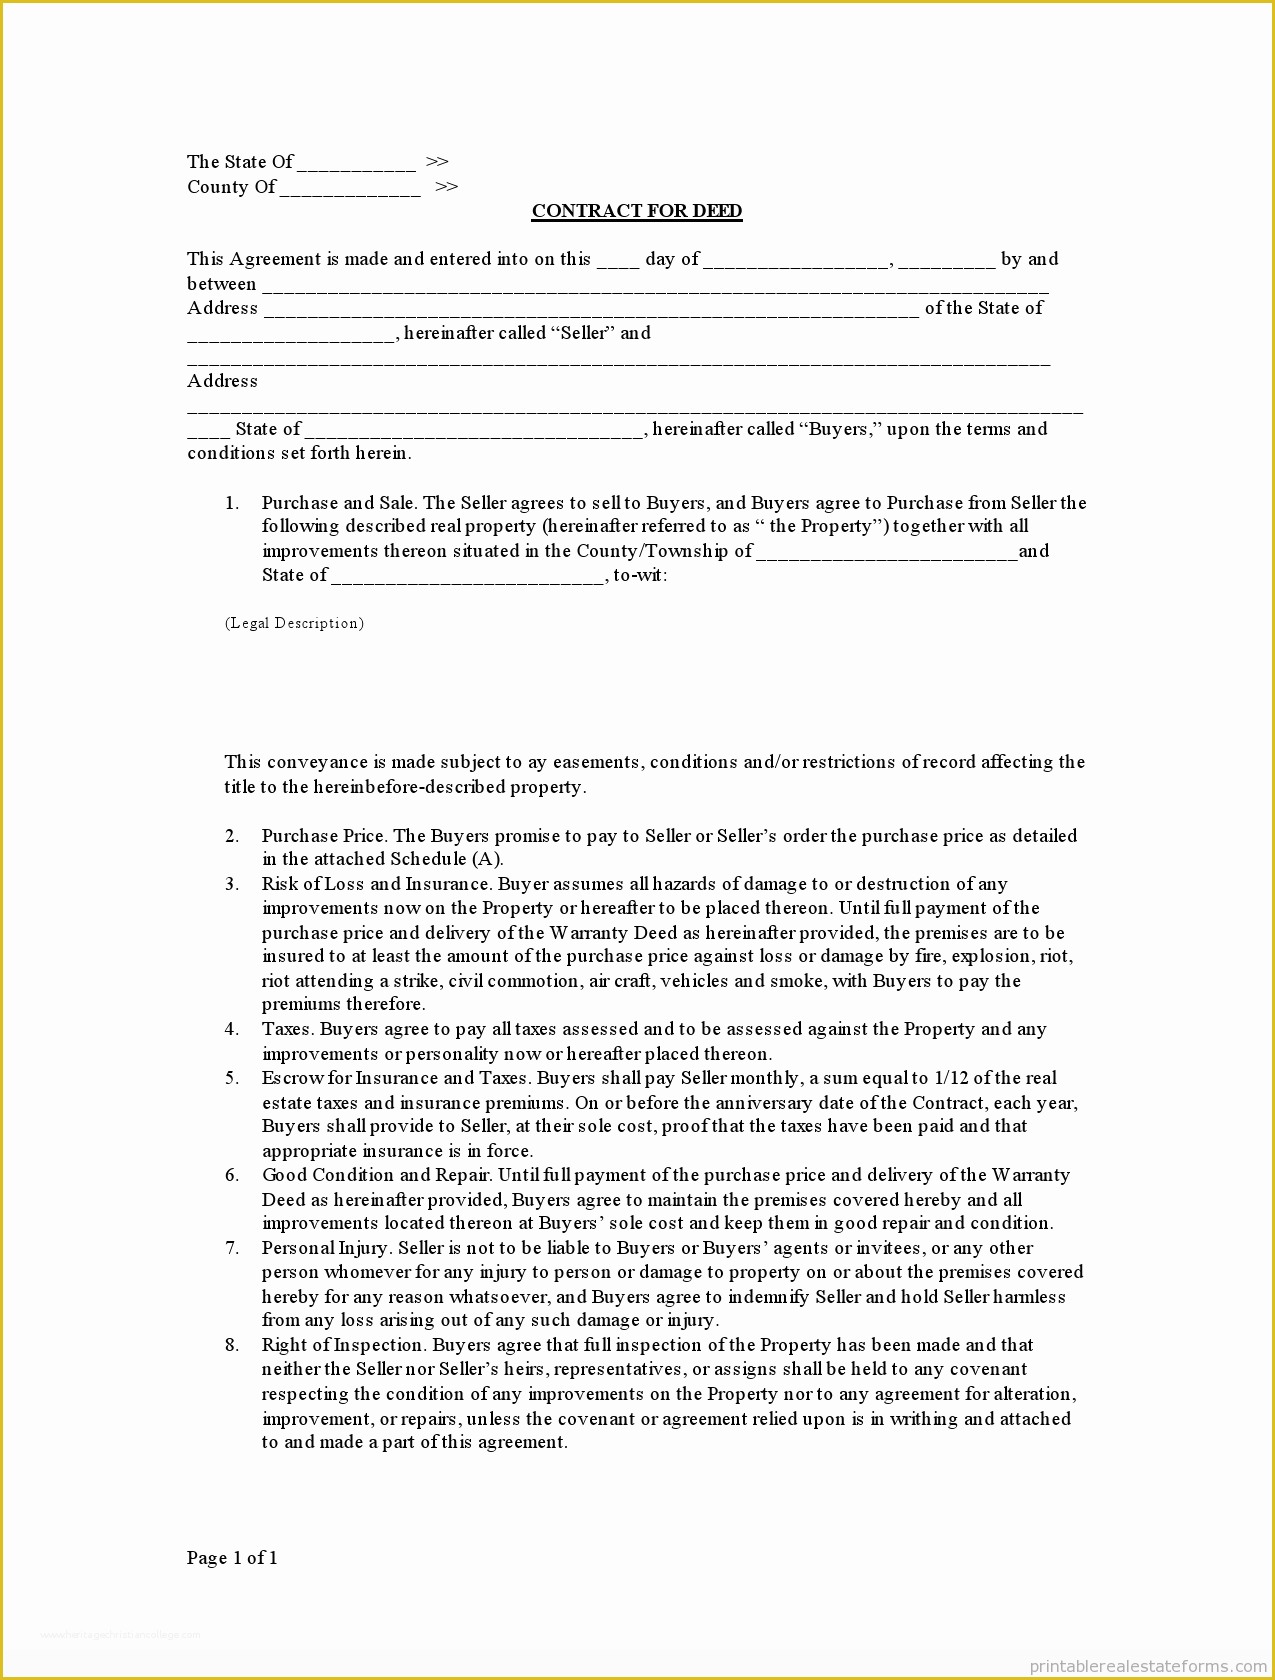 Free Contract for Deed Template Of Free Printable Contract for Deed form Basic Templates